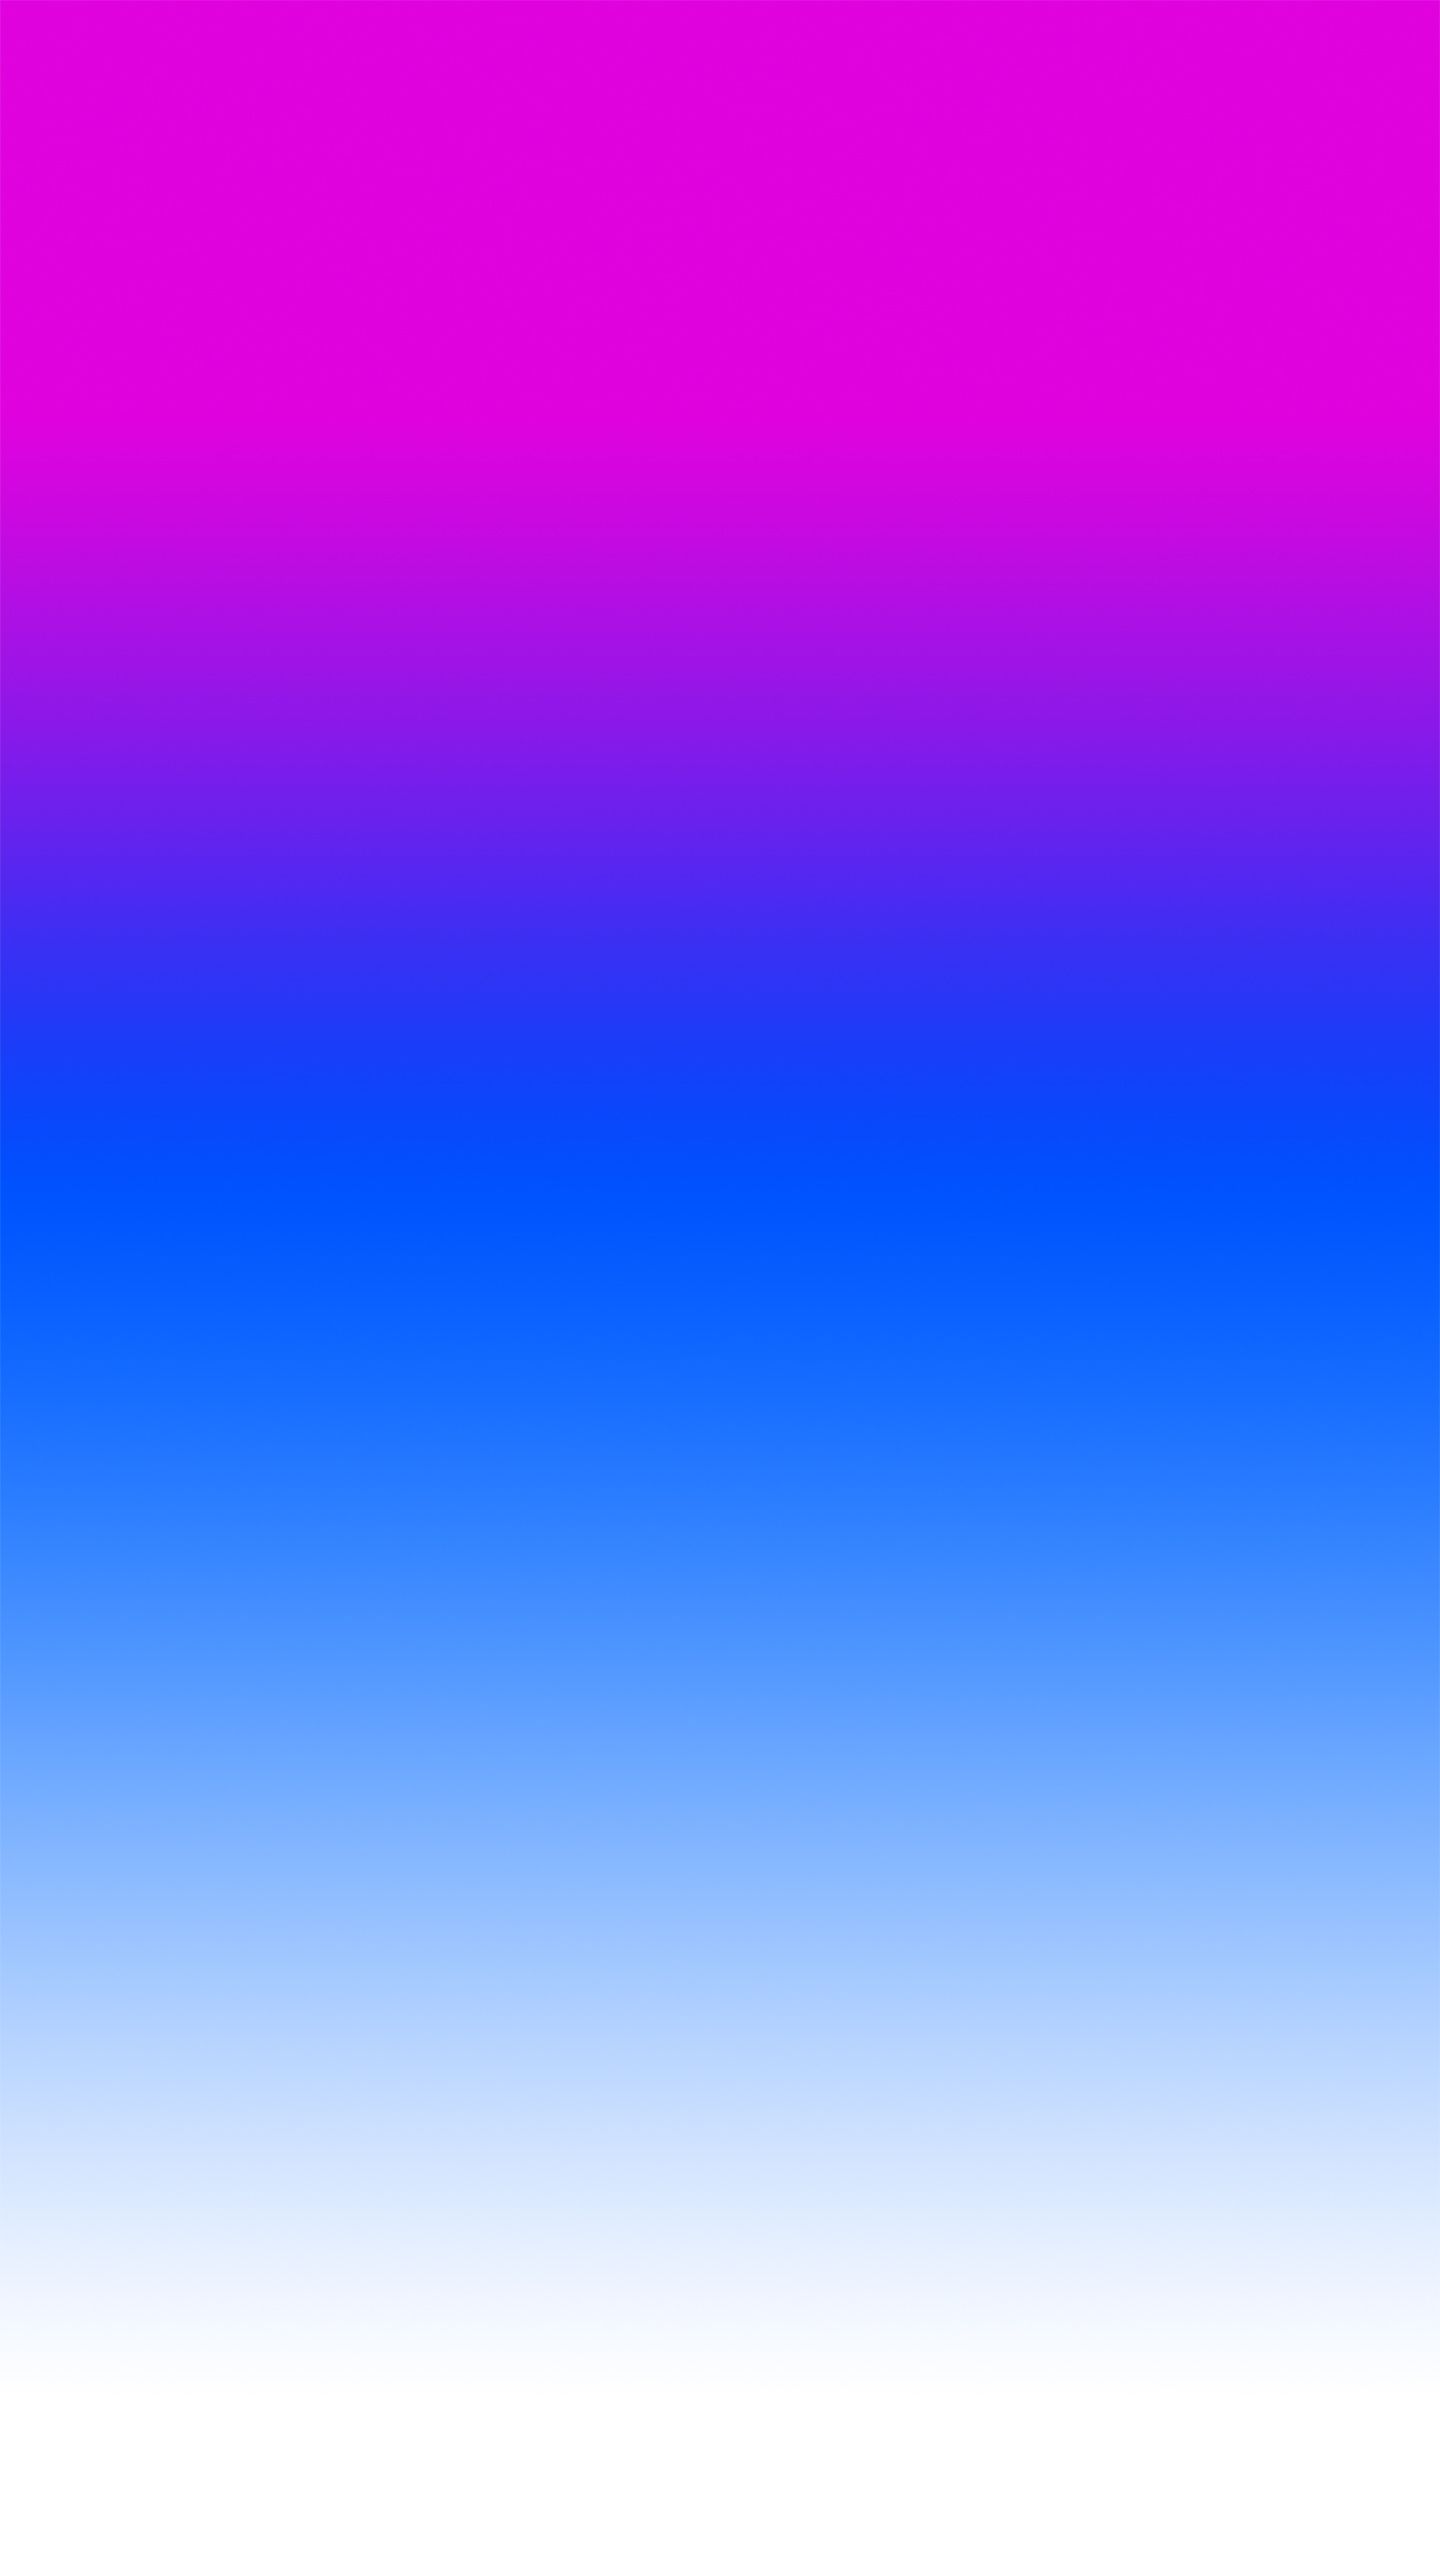 mix color_pink blue white (2560x1440). Color mixing, Orange wallpaper, Abstract iphone wallpaper